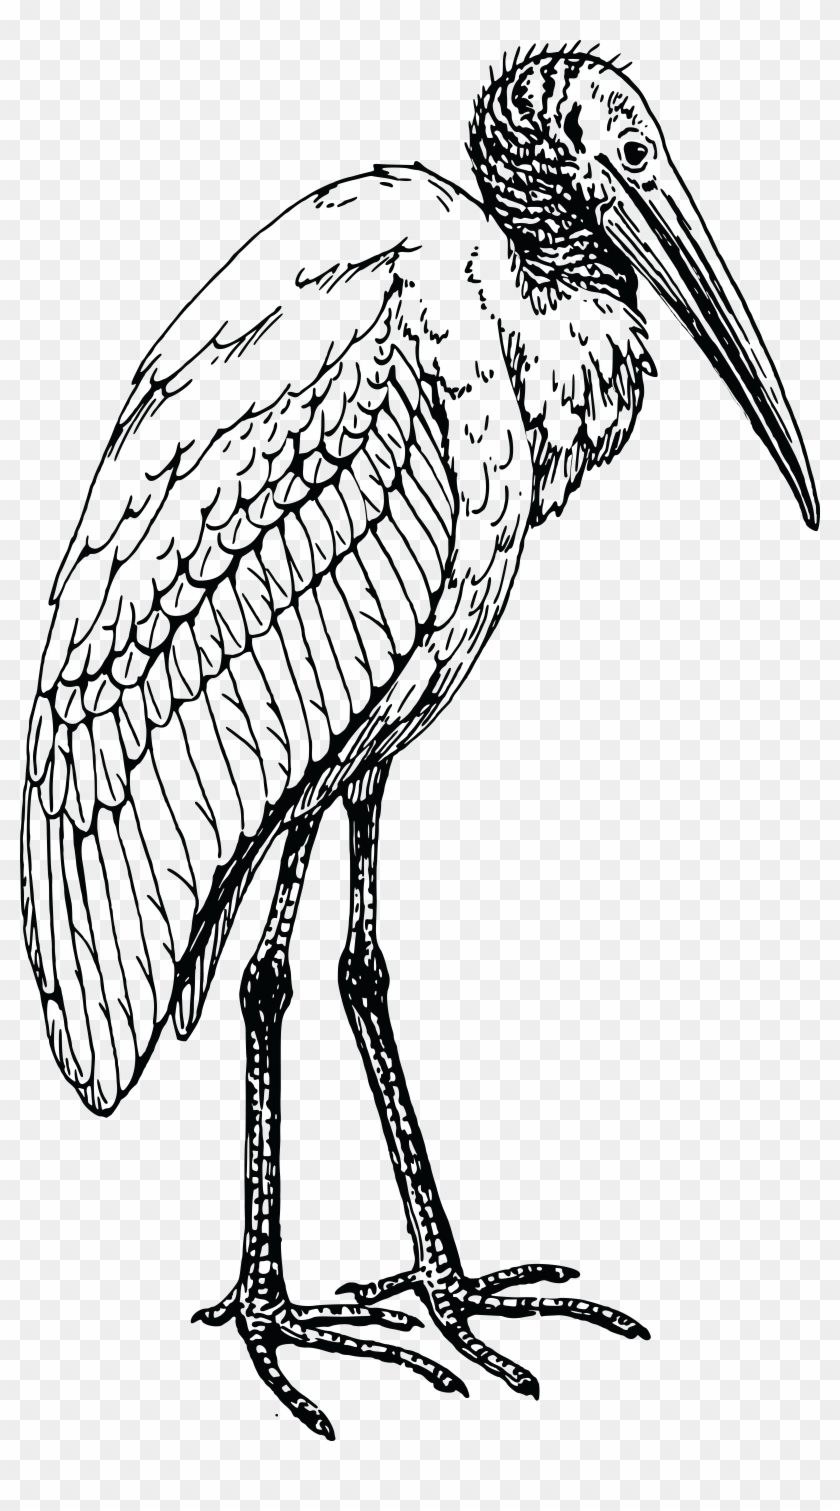 Free Clipart Of A Bird - Wood Stork Line Drawing #334466